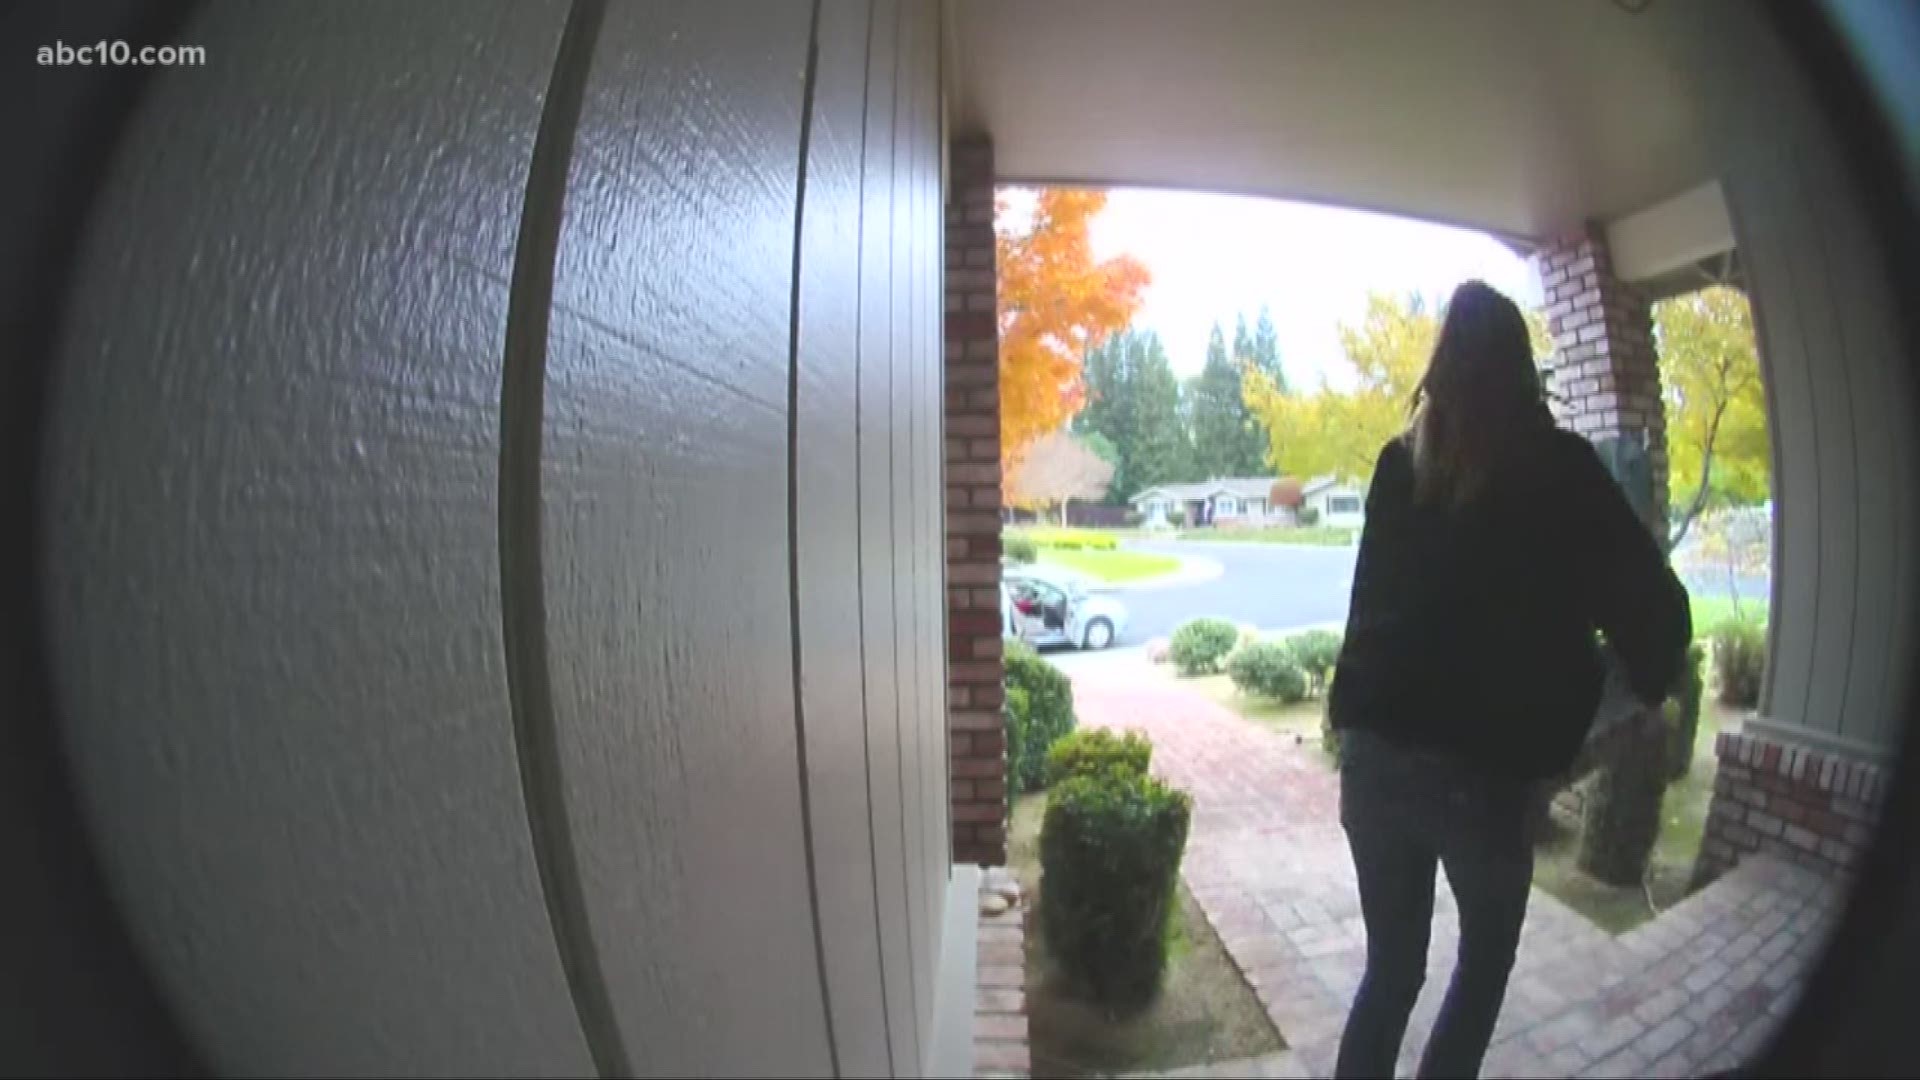 Surveillance video from the incidents show a woman exiting a car from the passenger seat, walking up to the porch and stealing the packages.